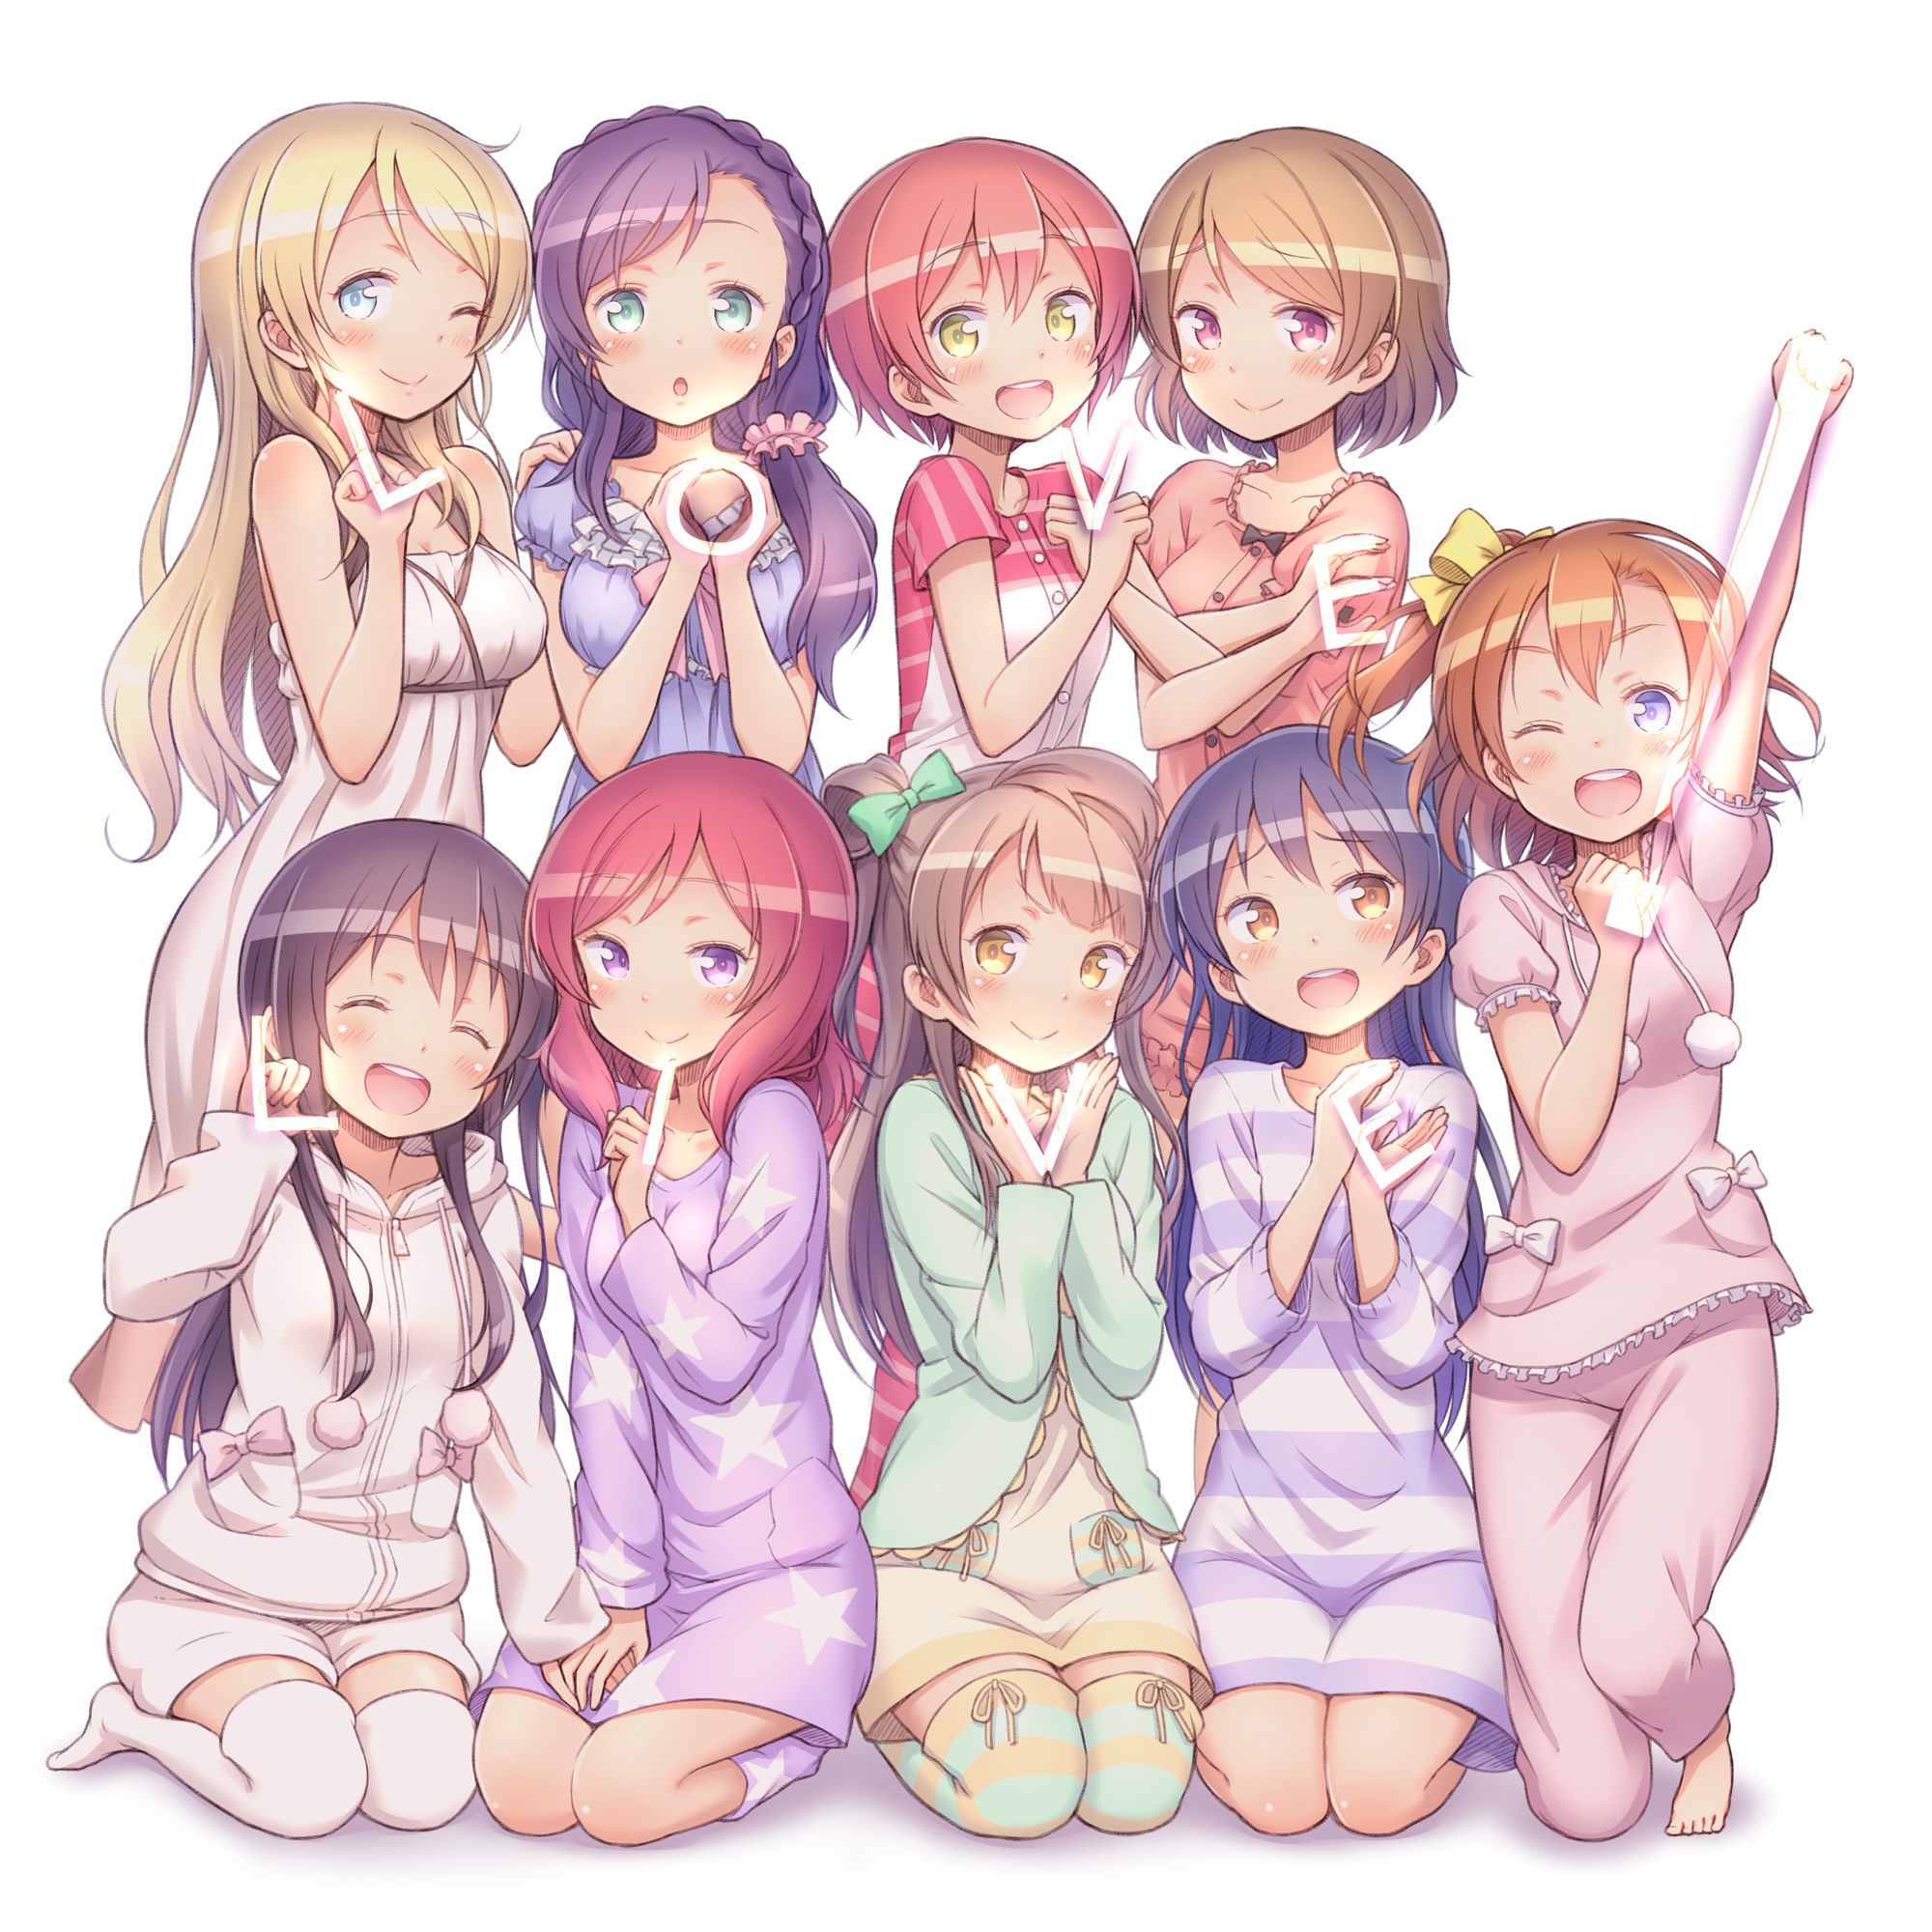 [Secondary, ZIP] give me pictures of cute girls wearing Pajamas or Nightie! 8